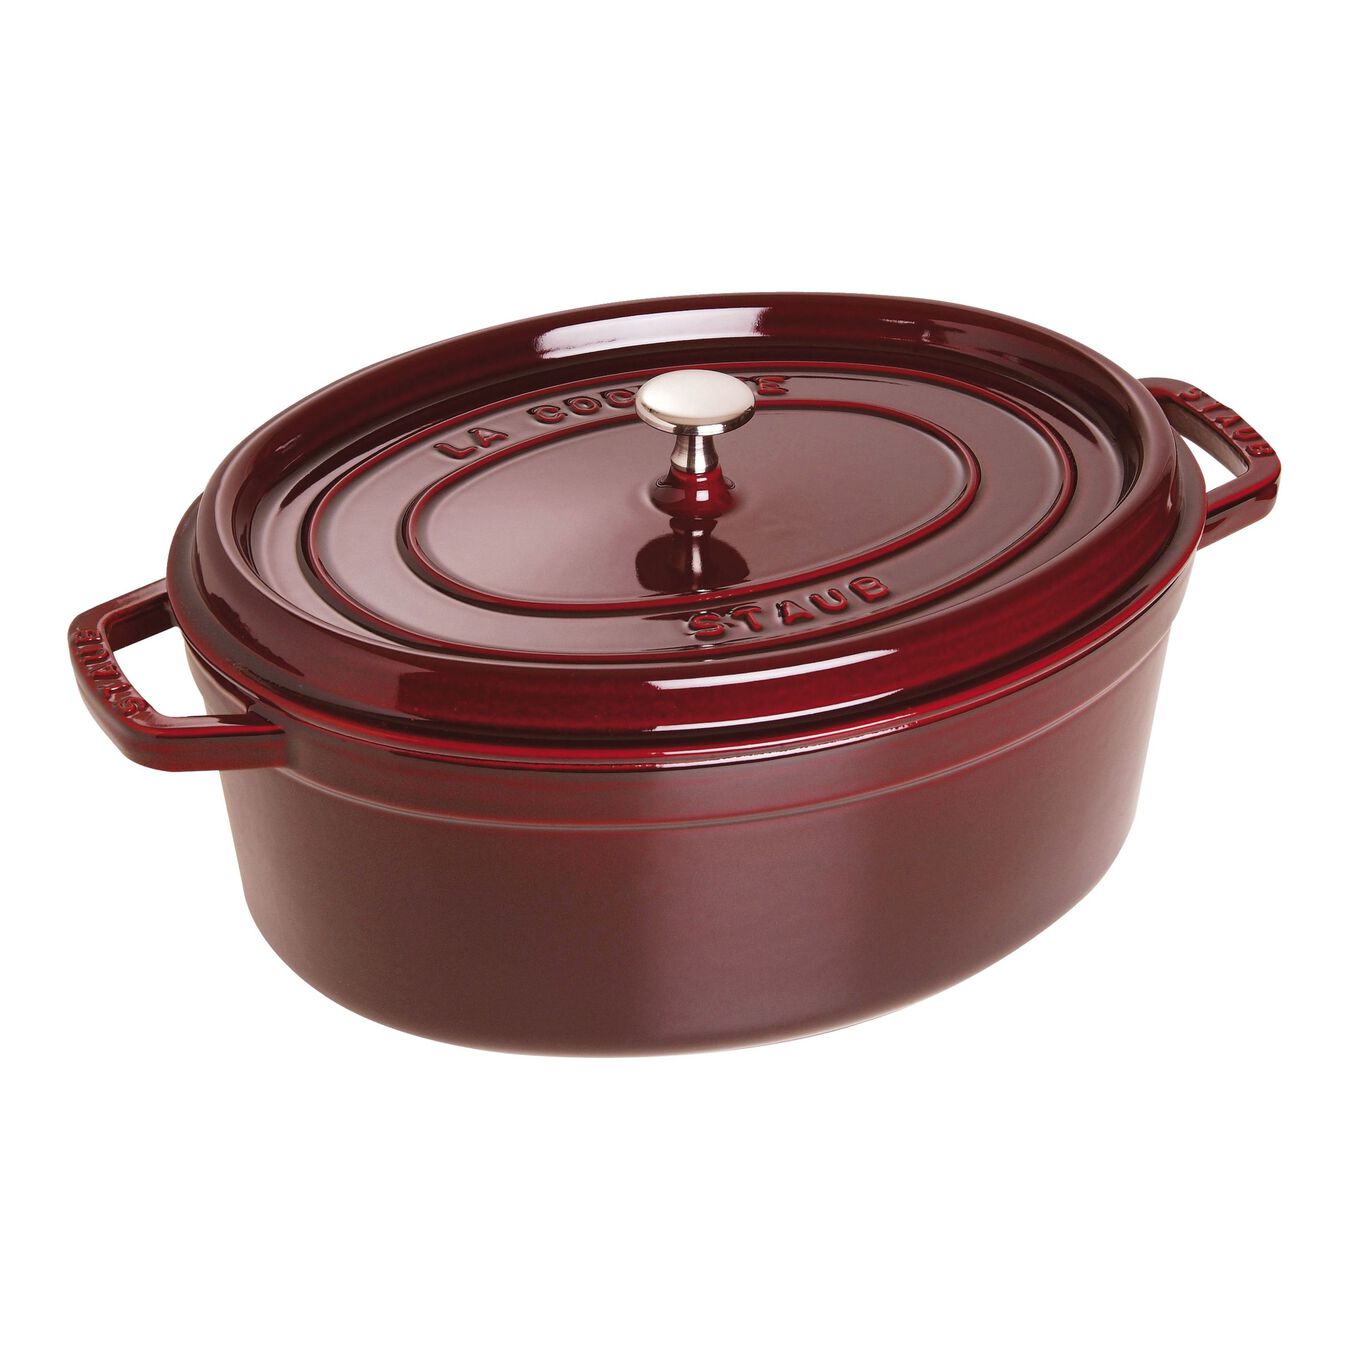 31 cm oval Cast iron Cocotte grenadine-red,,large 1